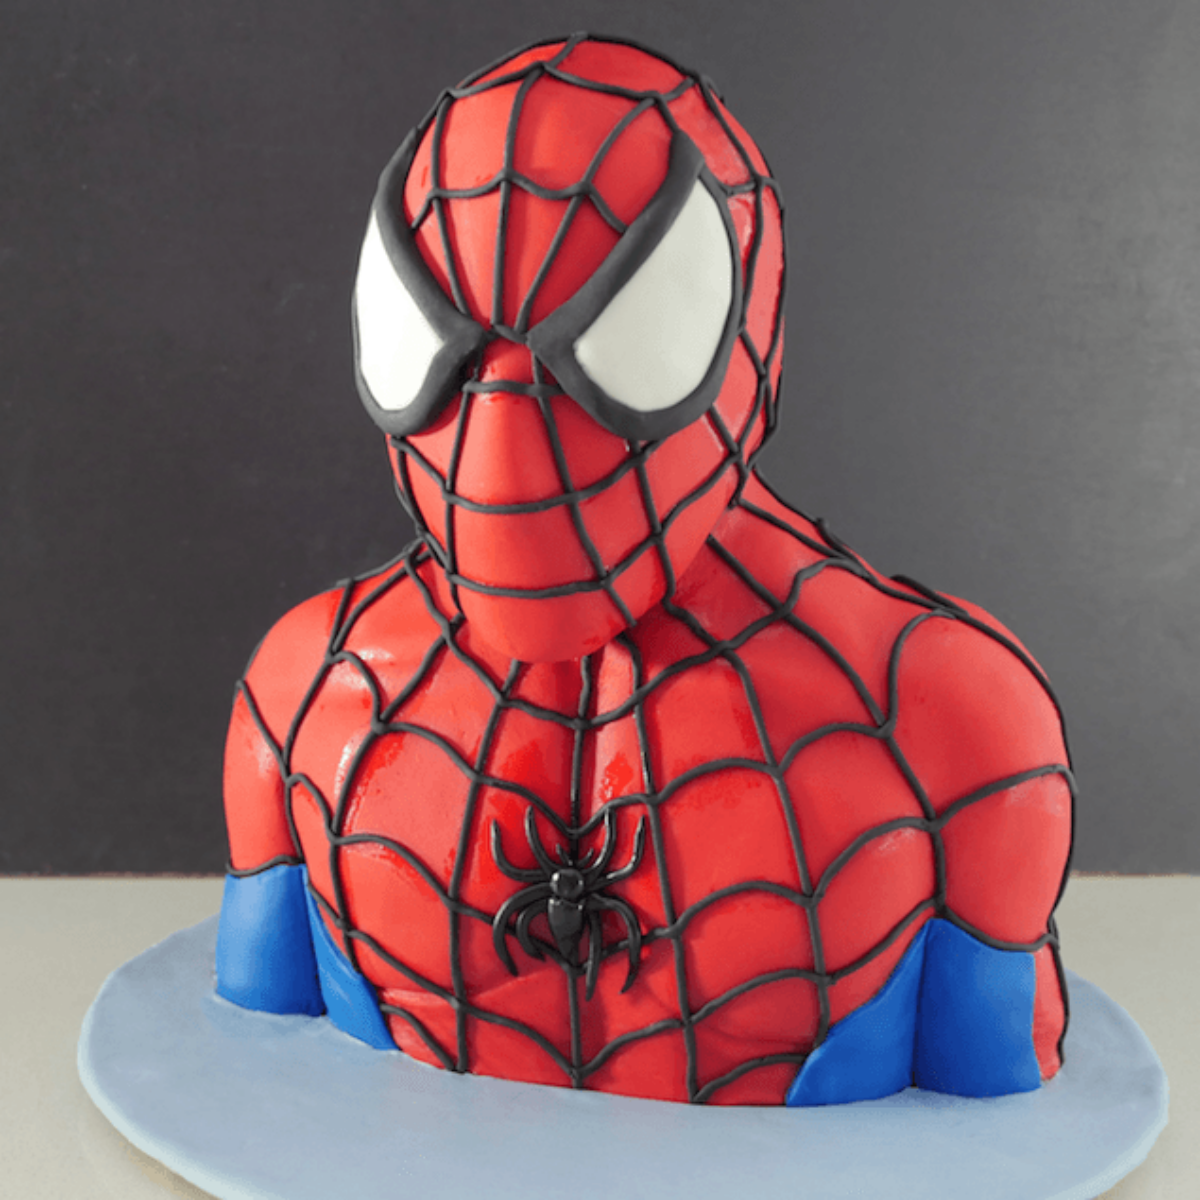 HowToCookThat : Cakes, Dessert & Chocolate | 3D Spiderman Cake ...